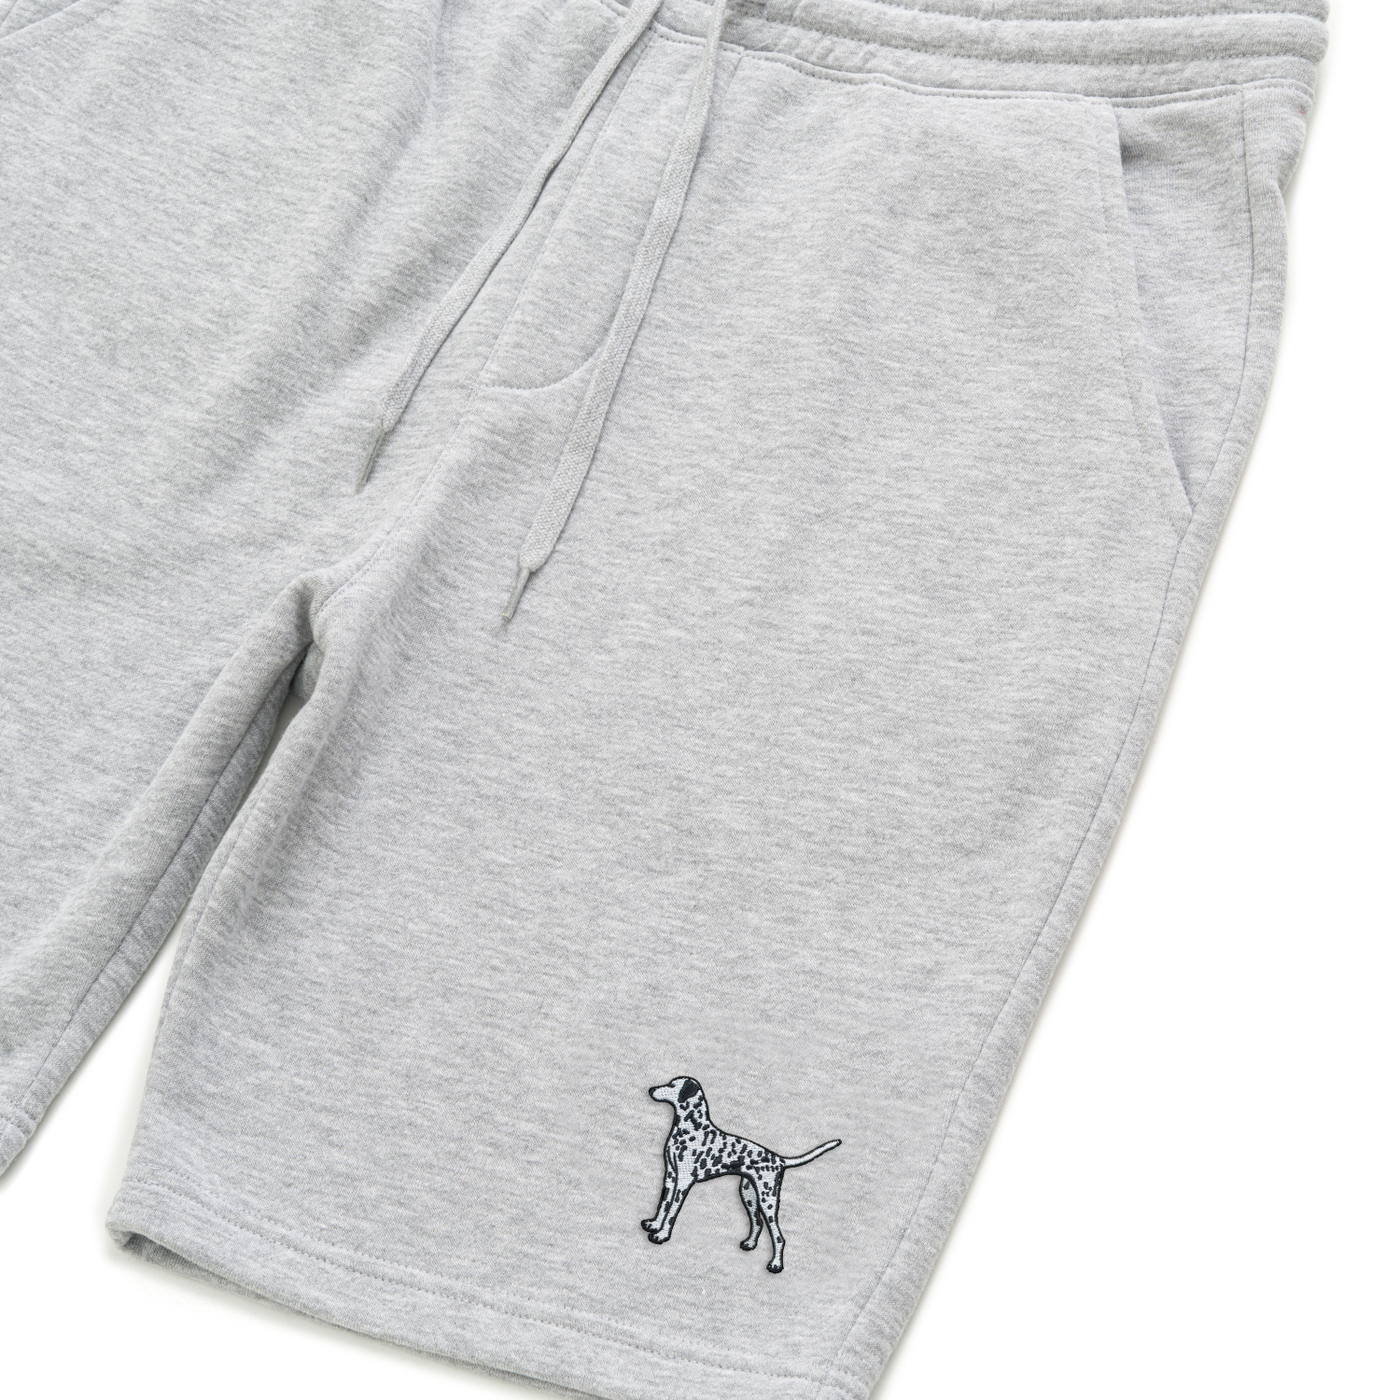 Bobby's Planet Men's Embroidered Dalmatian Shorts from Paws Dog Cat Animals Collection in Heather Grey Color#color_heather-grey